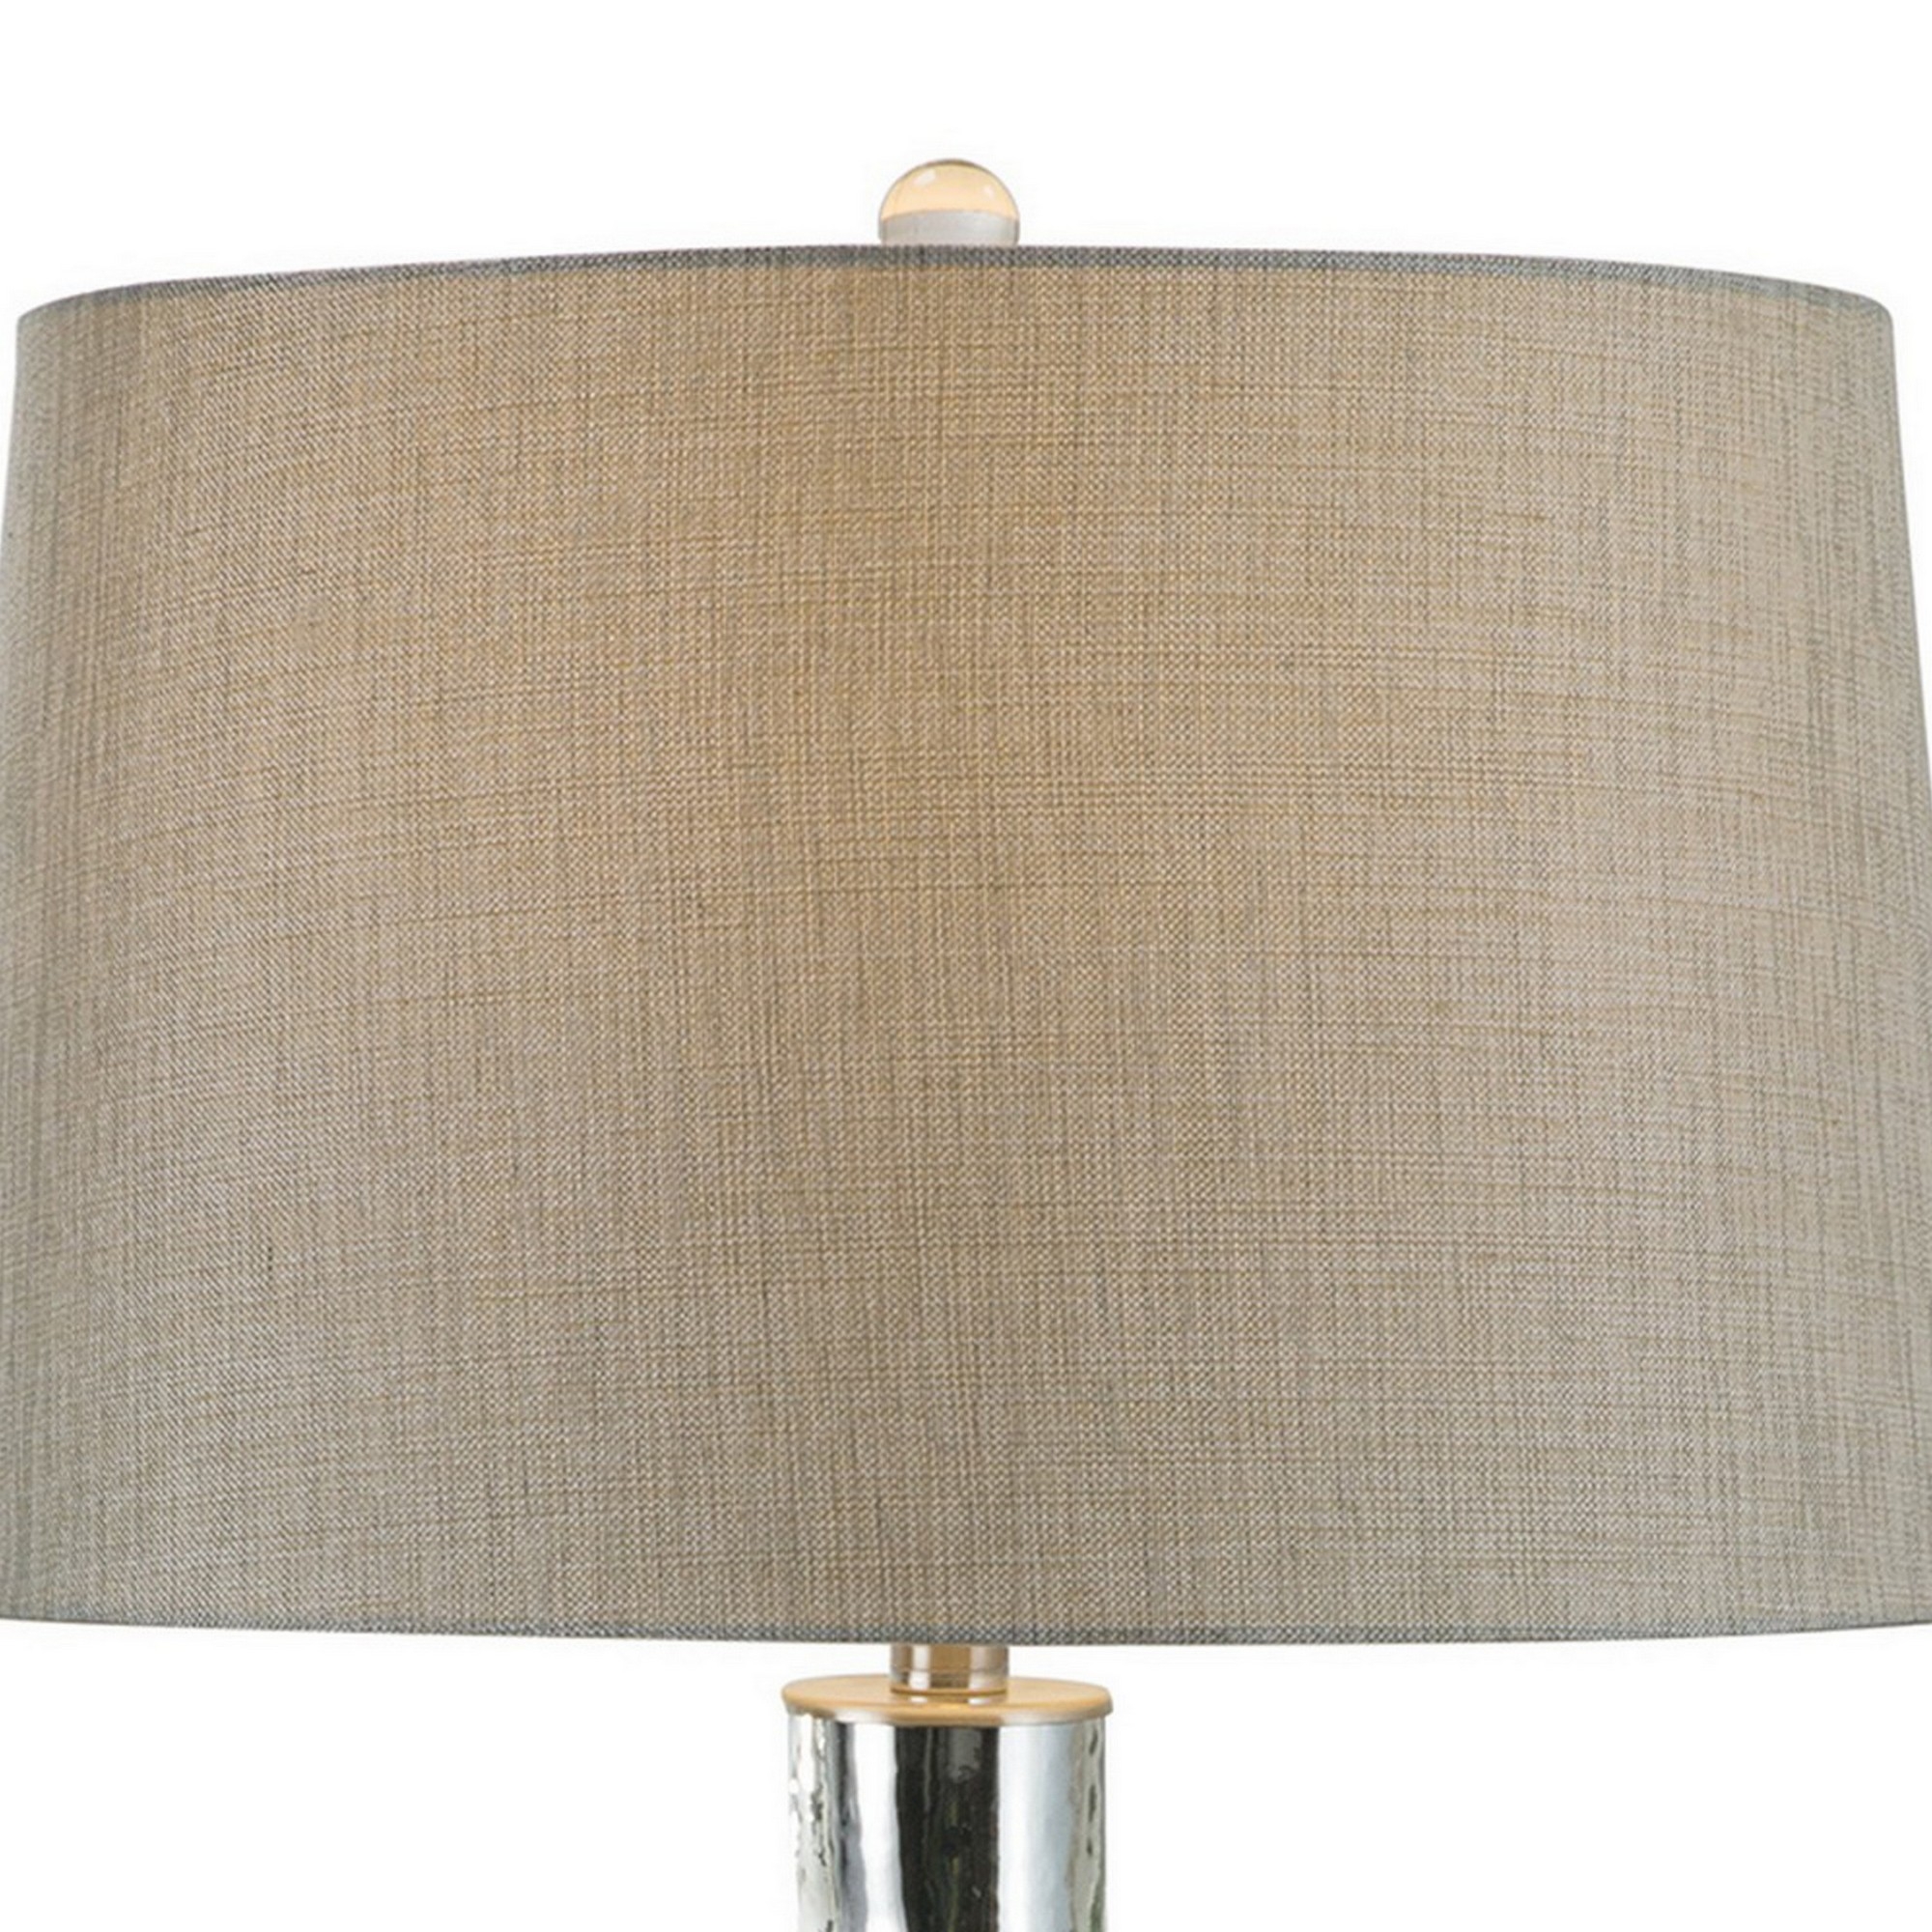 32 Inch Table Lamp With Traditional Base, Empire Shade, Glass, Chrome -Saltoro Sherpi